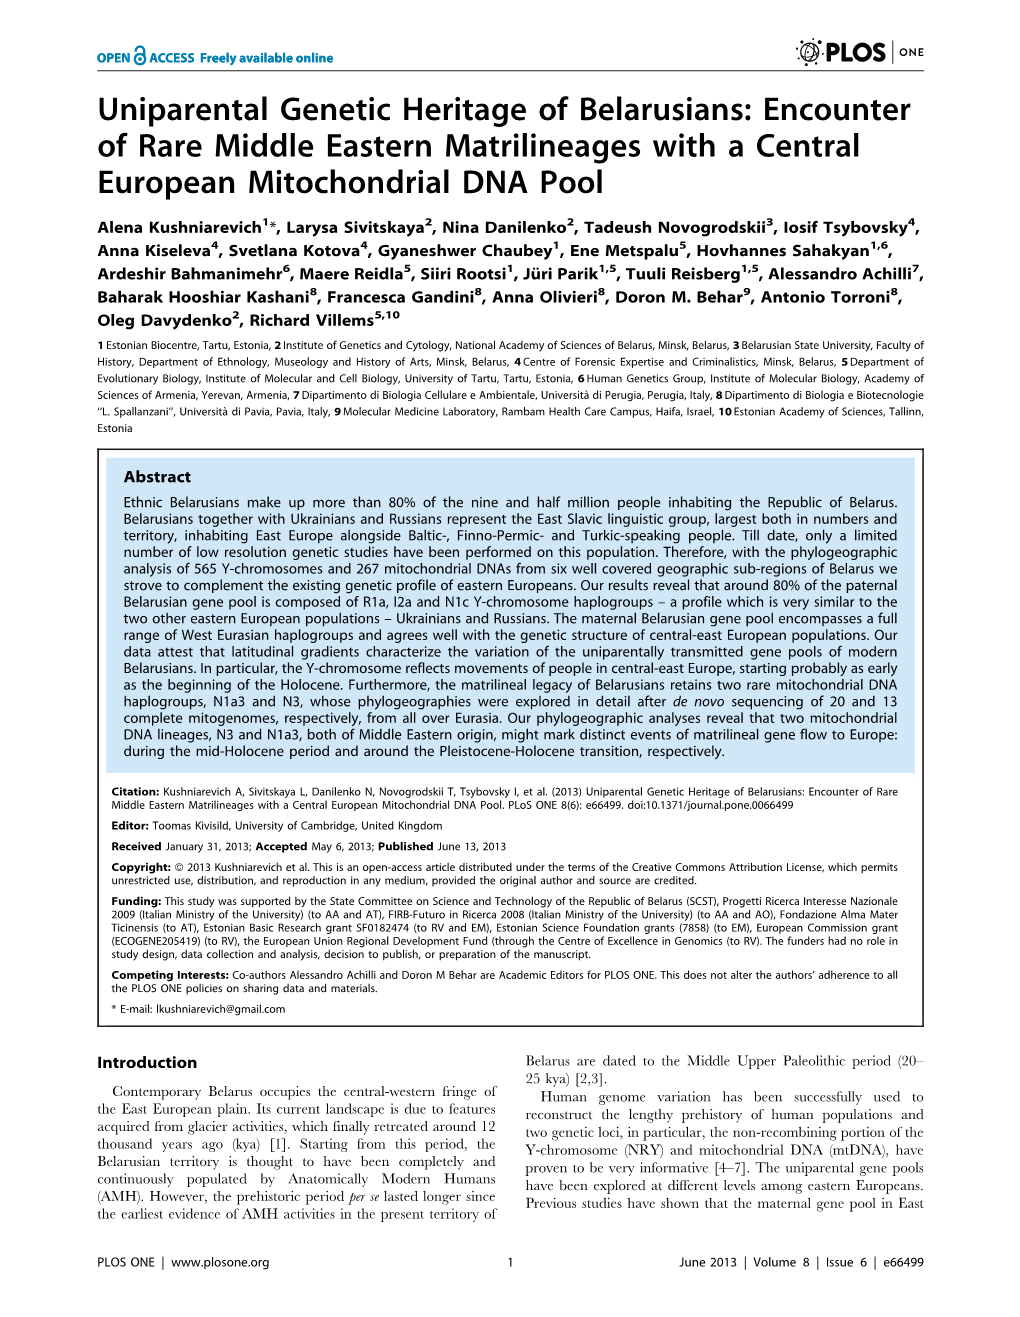 Uniparental Genetic Heritage of Belarusians: Encounter of Rare Middle Eastern Matrilineages with a Central European Mitochondrial DNA Pool